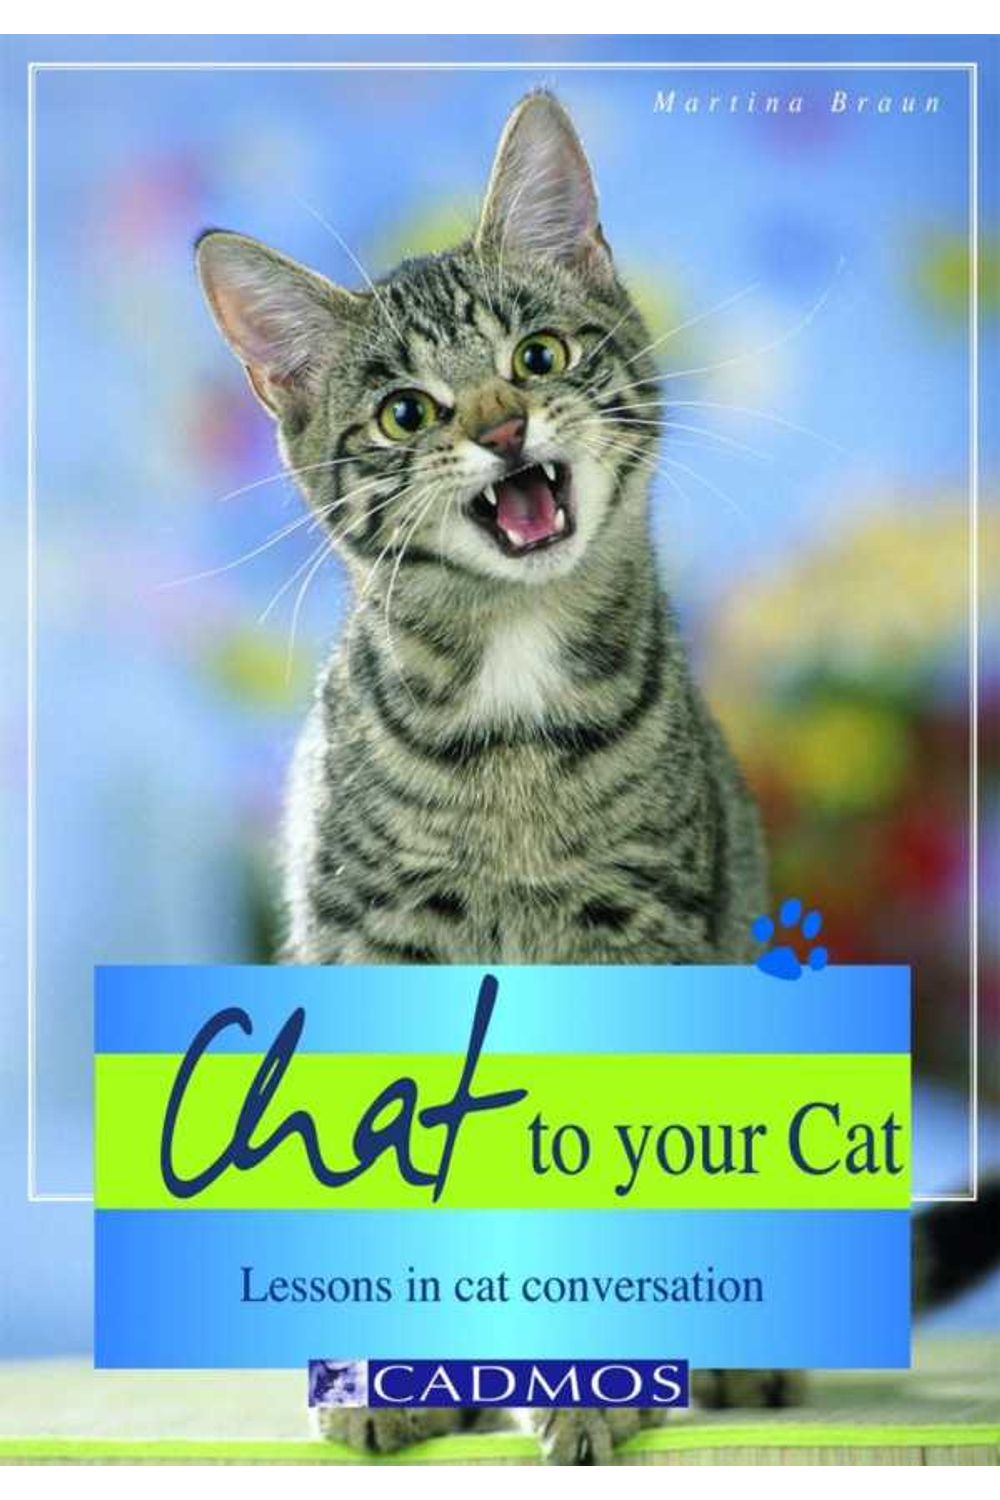 bw-chat-to-your-cat-cadmos-publishing-9780857886569